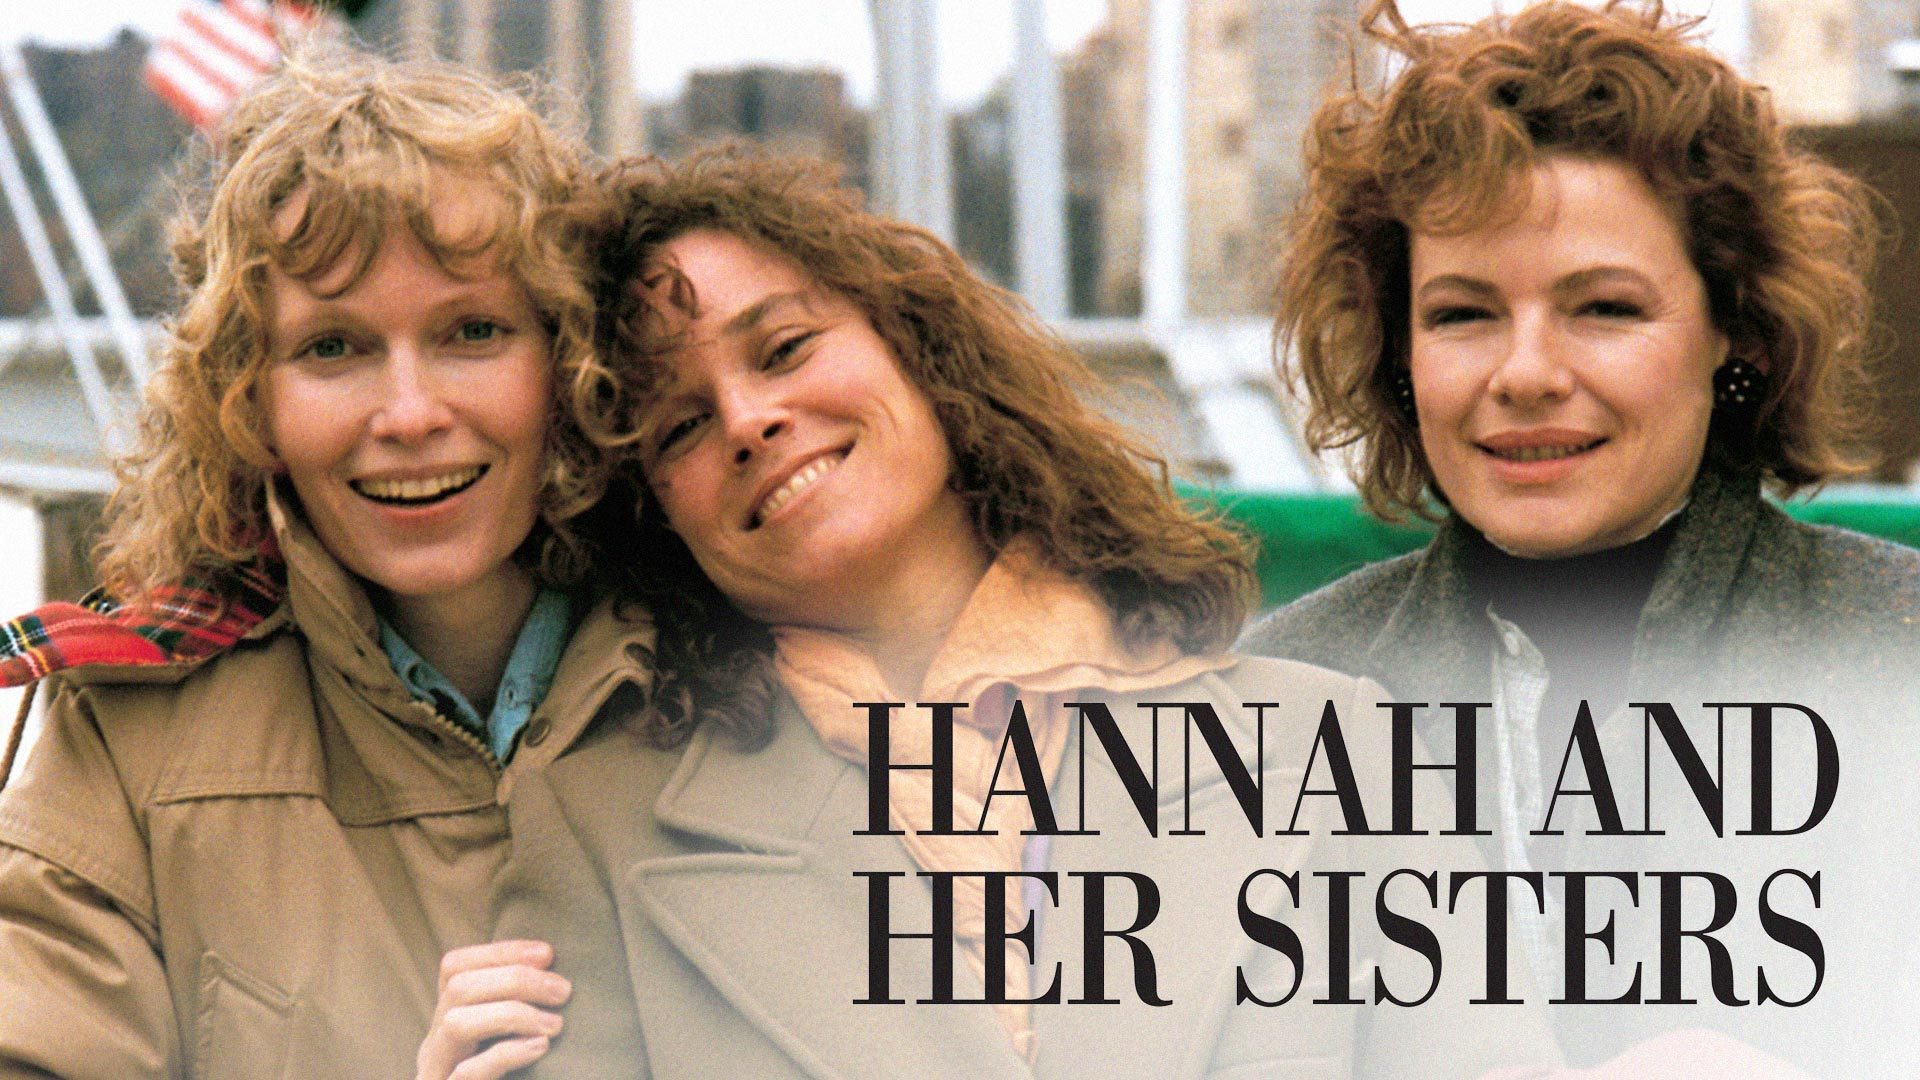 Hannah and Her Sisters (1986) Storyline and Short Reviews